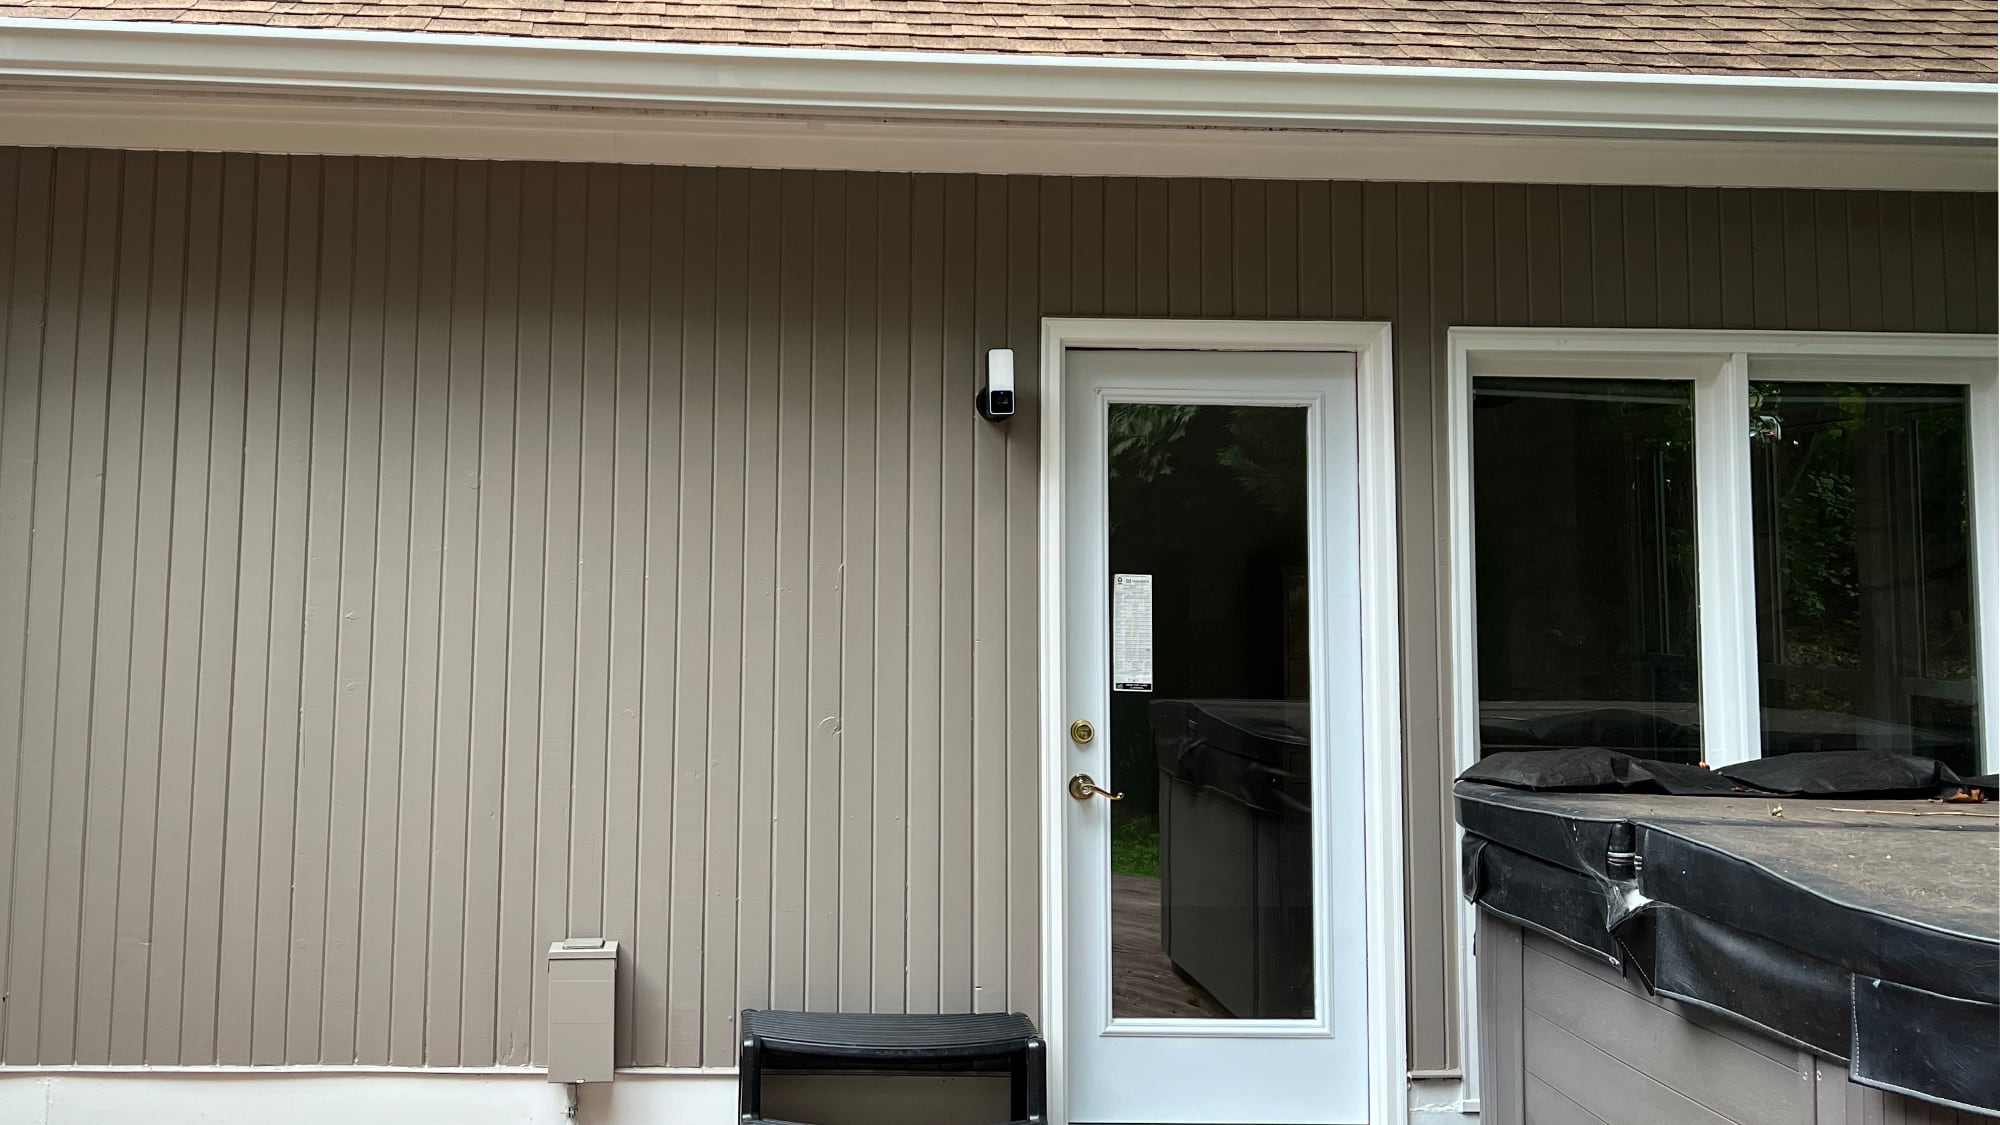 Review: Eve Outdoor Cam excels as a 2-in-1 HomeKit camera and floodlight